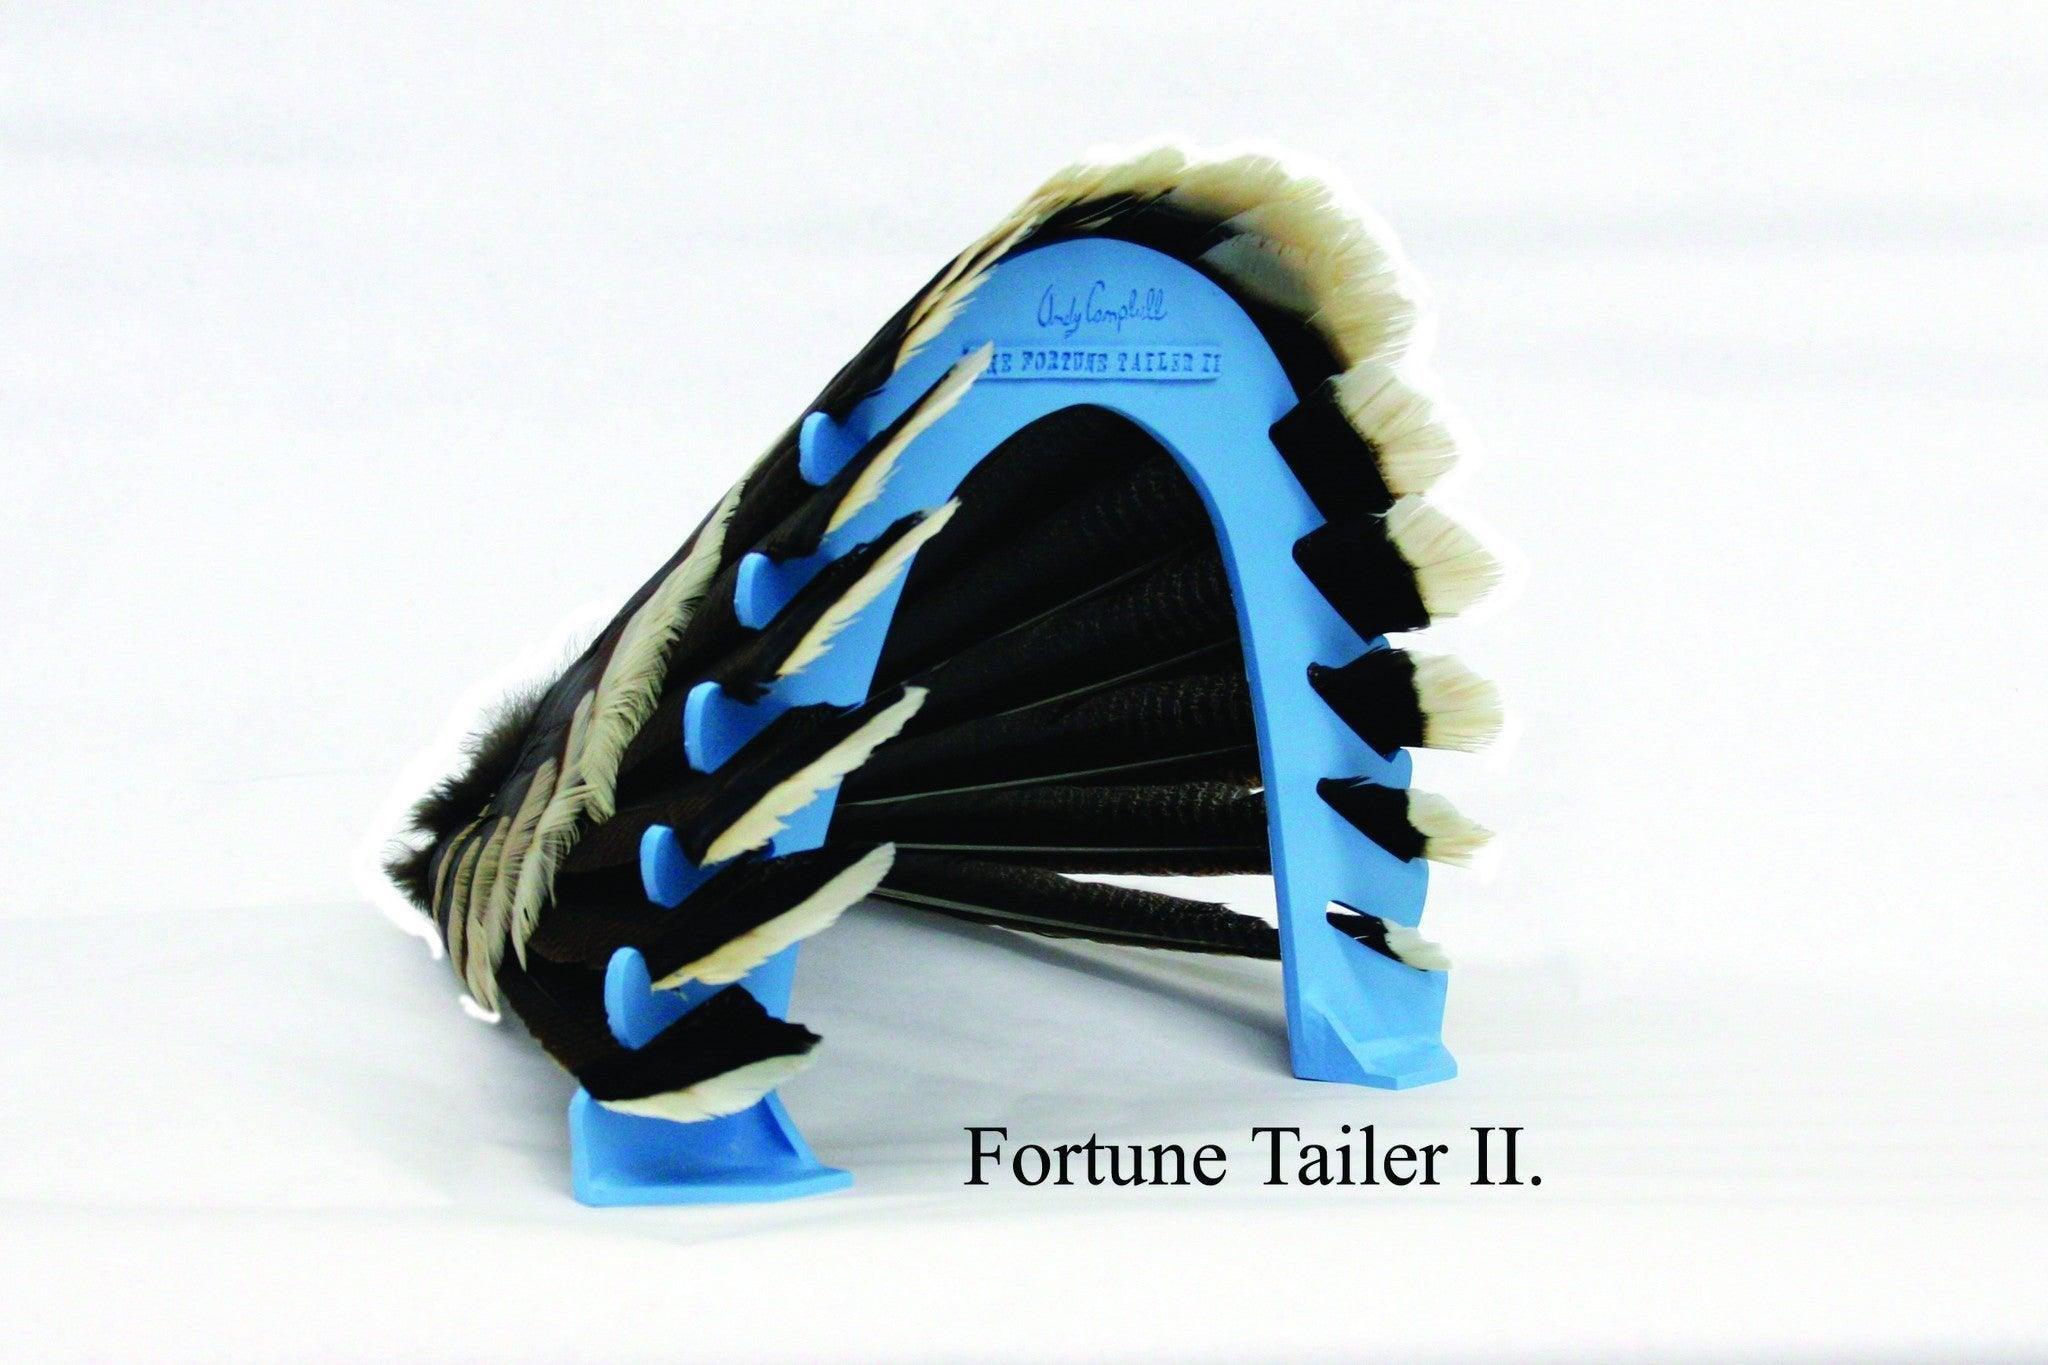 Fortune Tailer by Andy Campbell - Matuska Taxidermy Supply Company